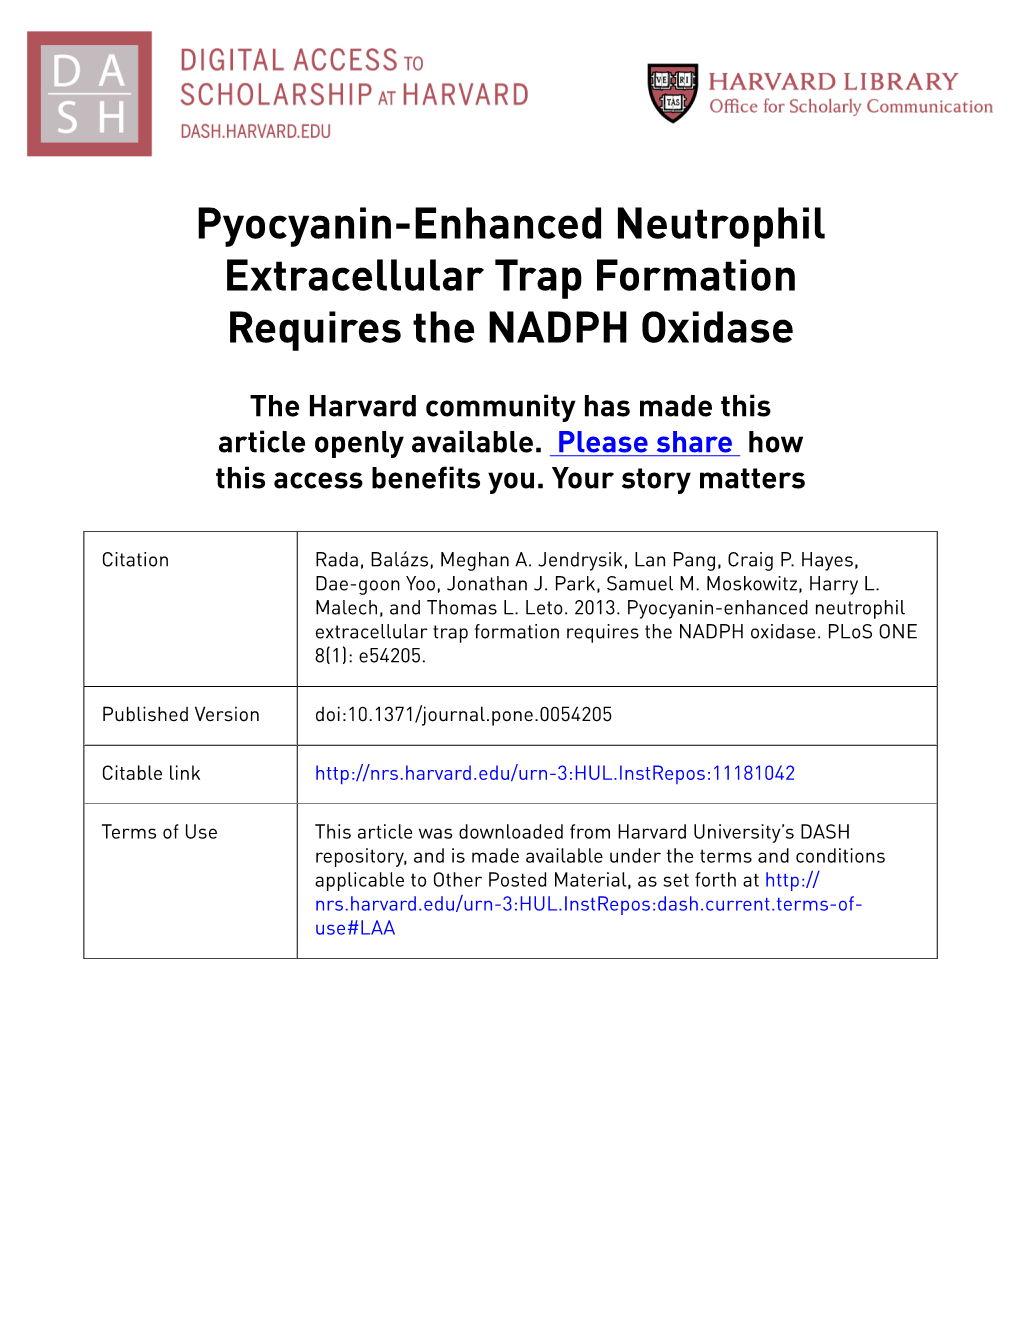 Pyocyanin-Enhanced Neutrophil Extracellular Trap Formation Requires the NADPH Oxidase